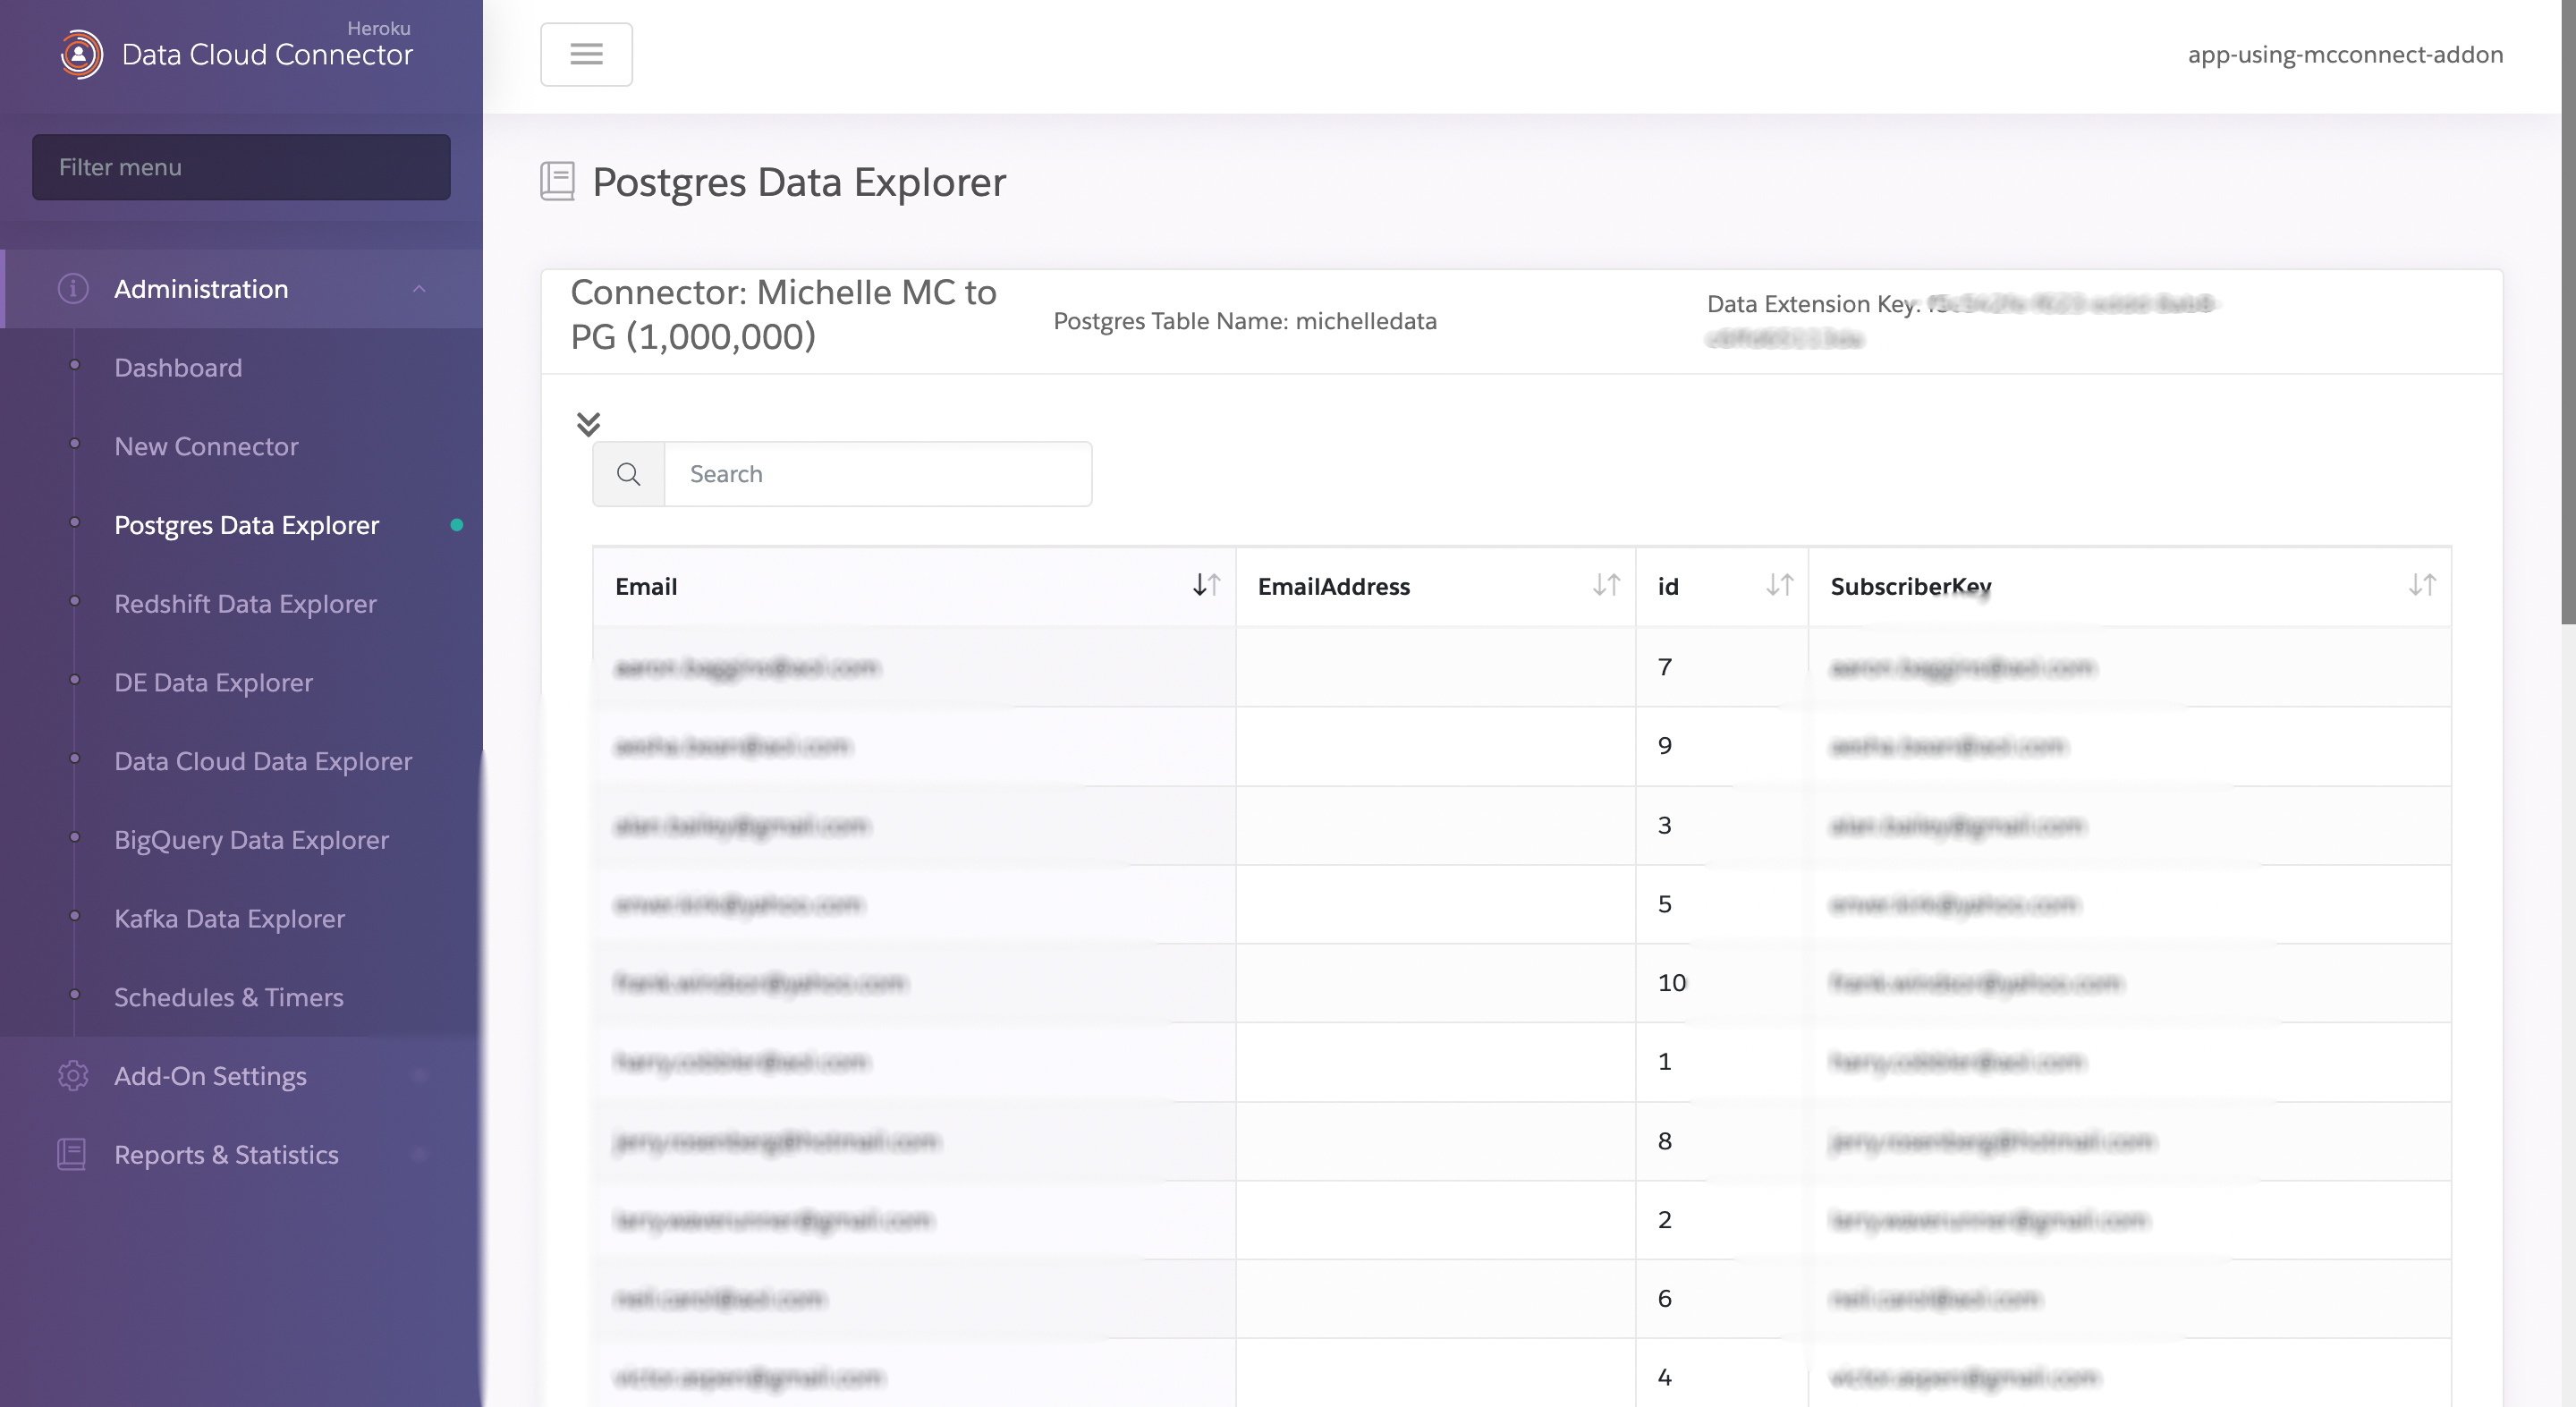 A screenshot of the Postgres Data Explorer Administration page showing synchronized marketing data rows.